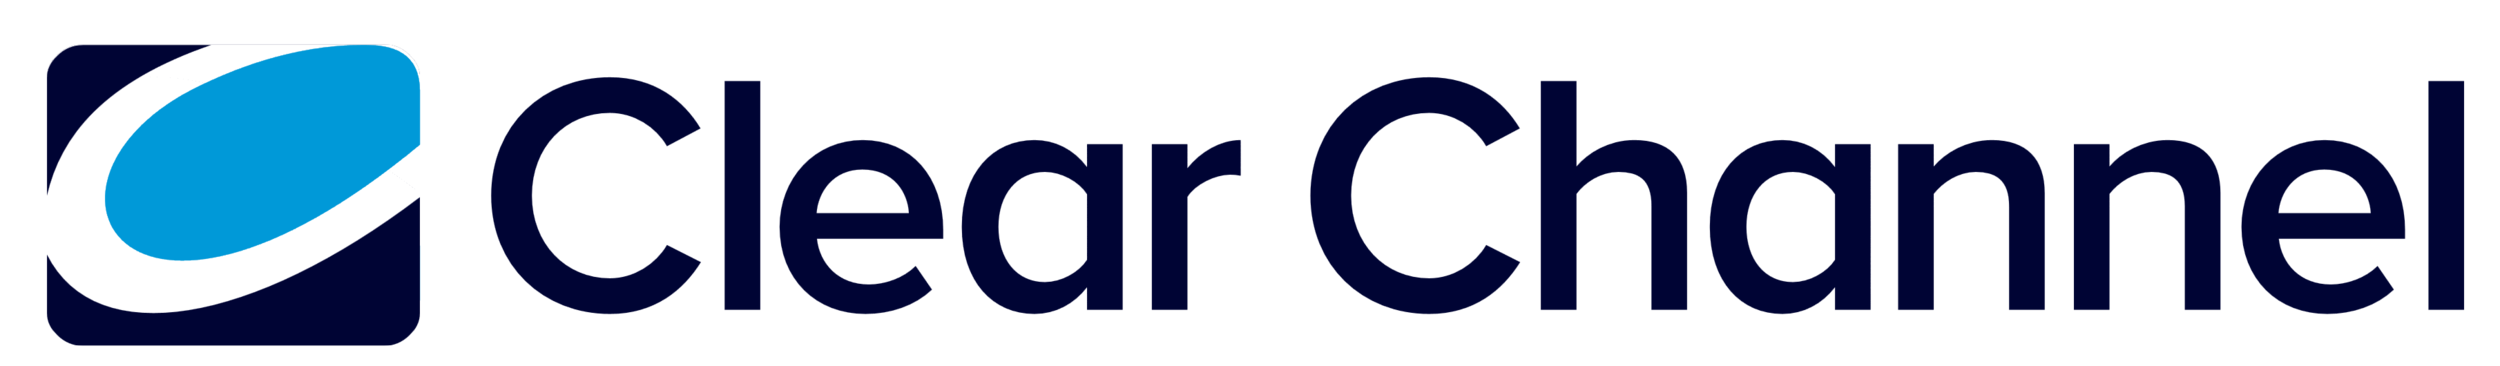 Clear_Channel_logo.png